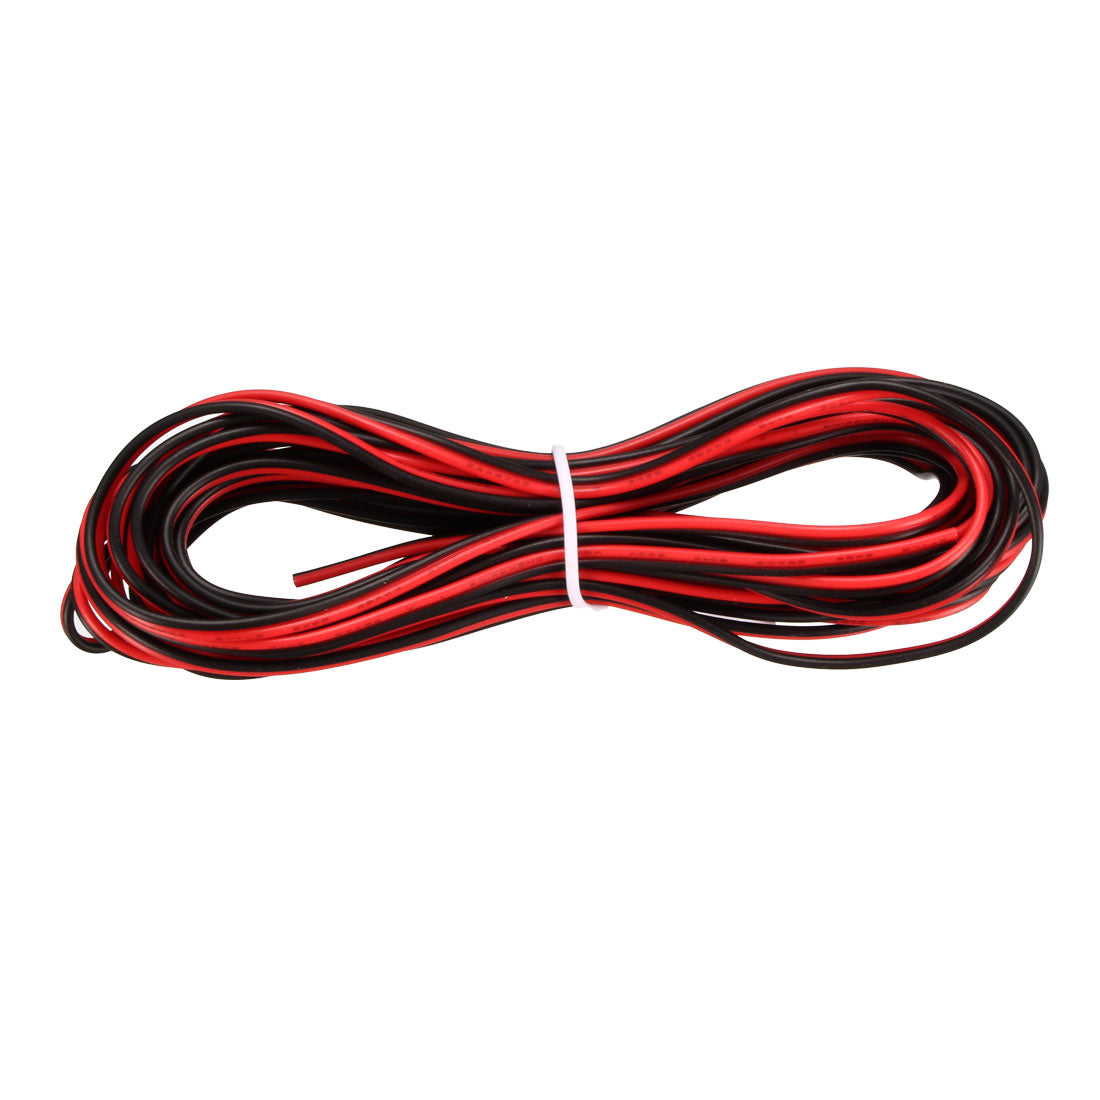 uxcell Uxcell Red Black Wire 2pin Extension Cable Cord 28 AWG Parallel Wire Tin Plated Copper 5M Length for LED Strip Light